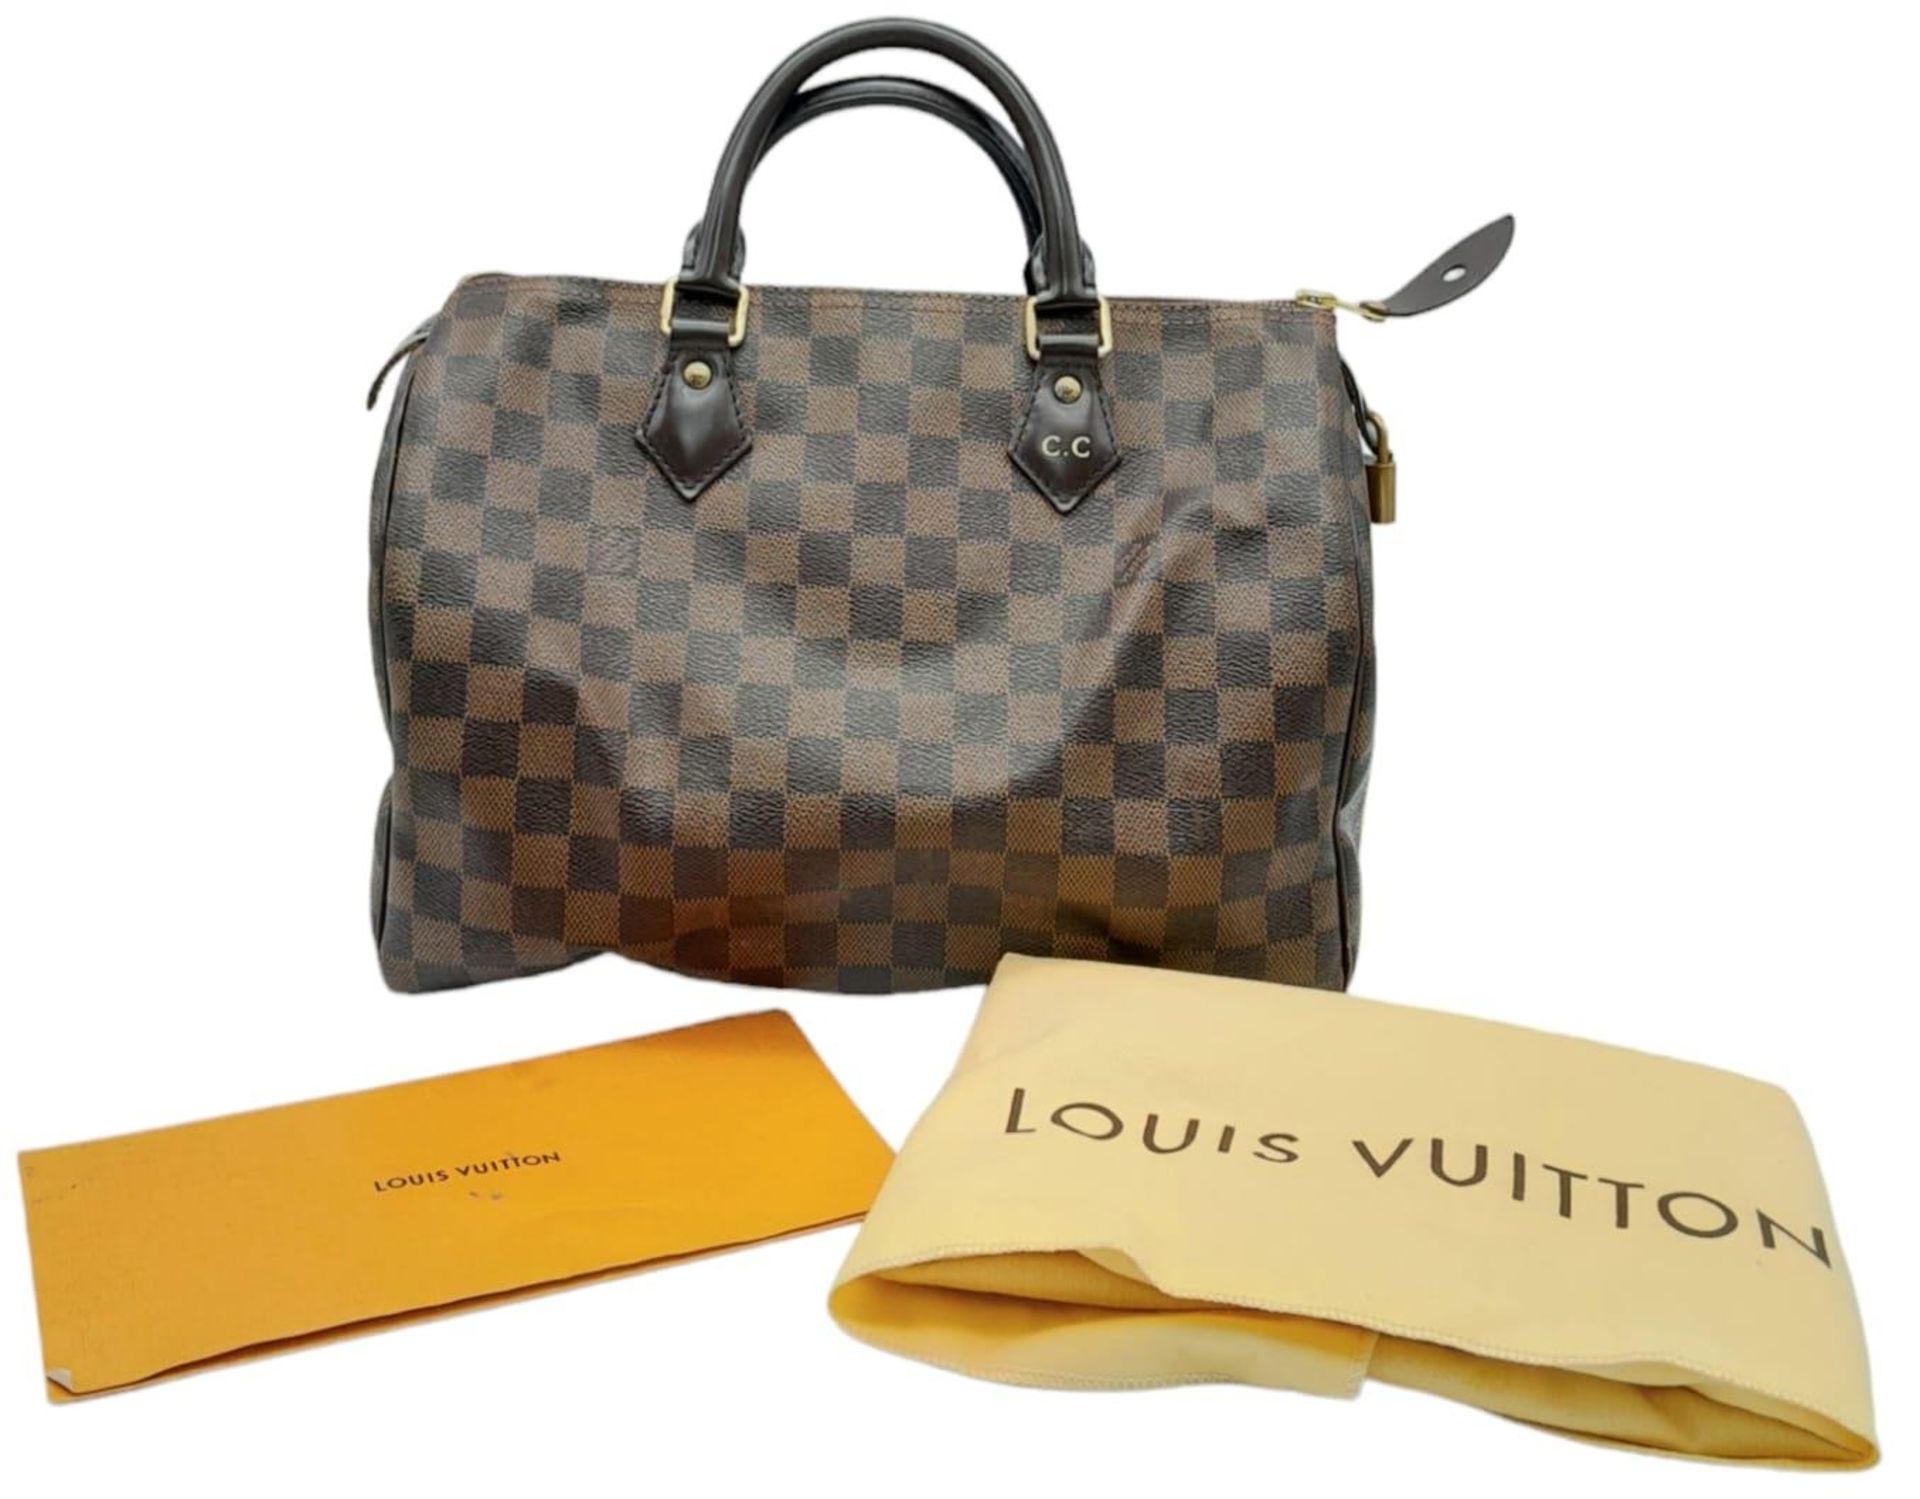 A Louis Vuitton Speedy Bag. Checked LV canvas exterior. Red textile interior. Comes with dust cover, - Image 8 of 12